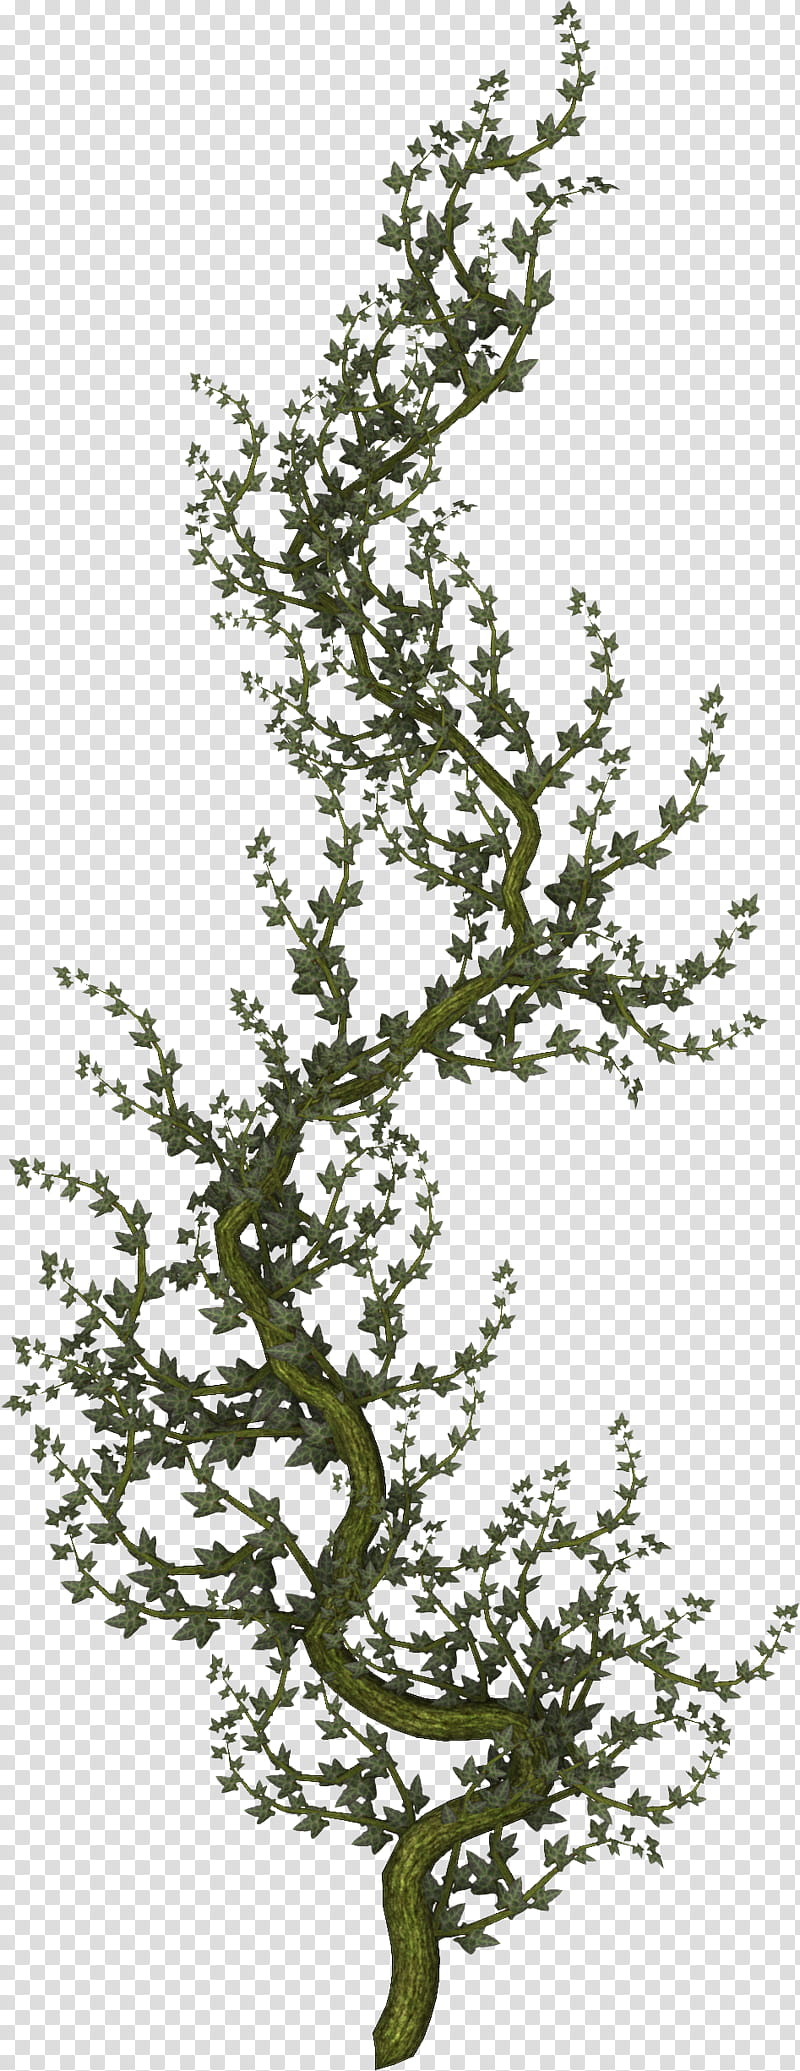 Creepers n Vines, green-leafed tree in white background transparent background PNG clipart